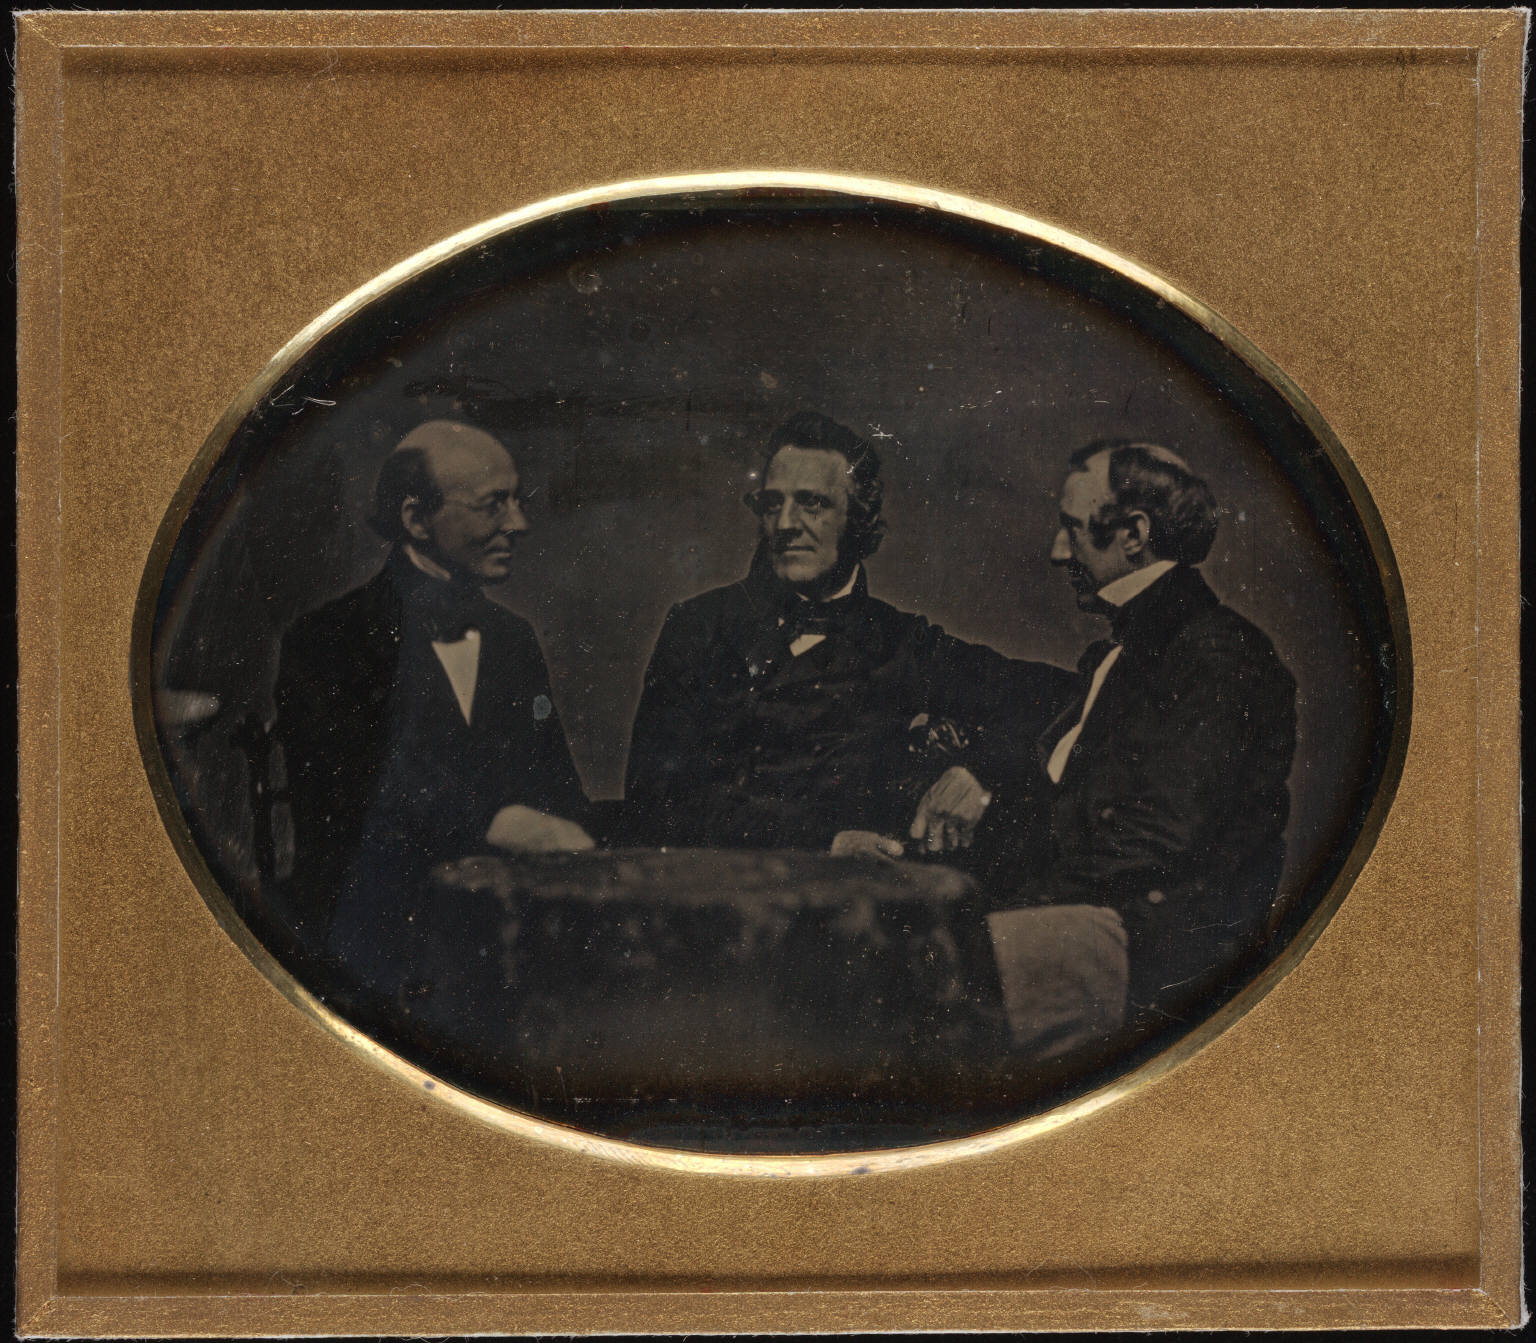 Garrison and fellow abolitionists George Thompson and Wendell Phillips, seated at table, daguerreotype, ca. 1850–1851. Author/Creator: Southworth and Hawes, Boston. Cite as: Yale Collection of American Literature, Beinecke Rare Book and Manuscript Library. (CC BY 2.0)